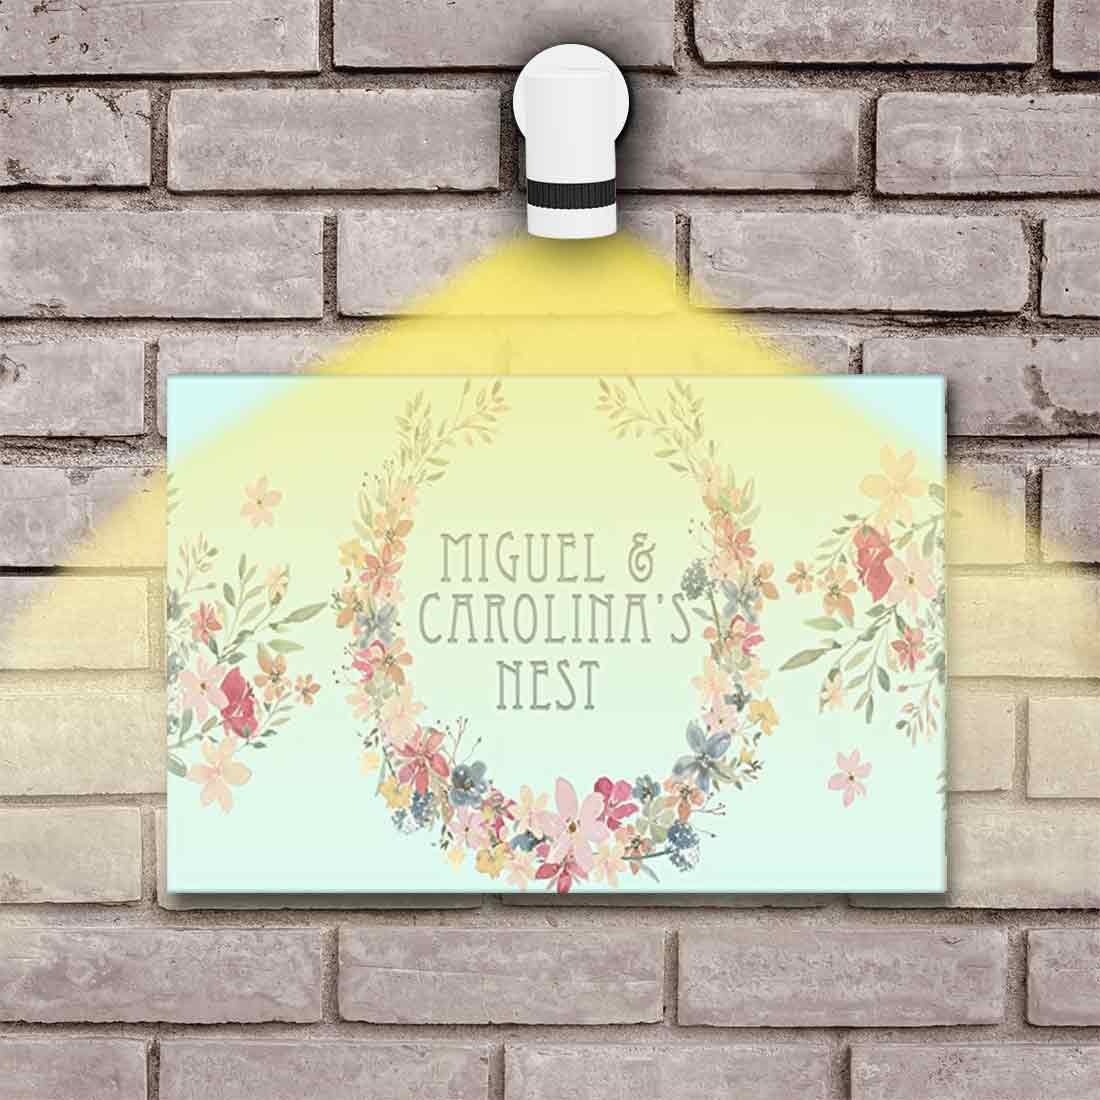 New Personalized Home Name Plate - Floral Ring